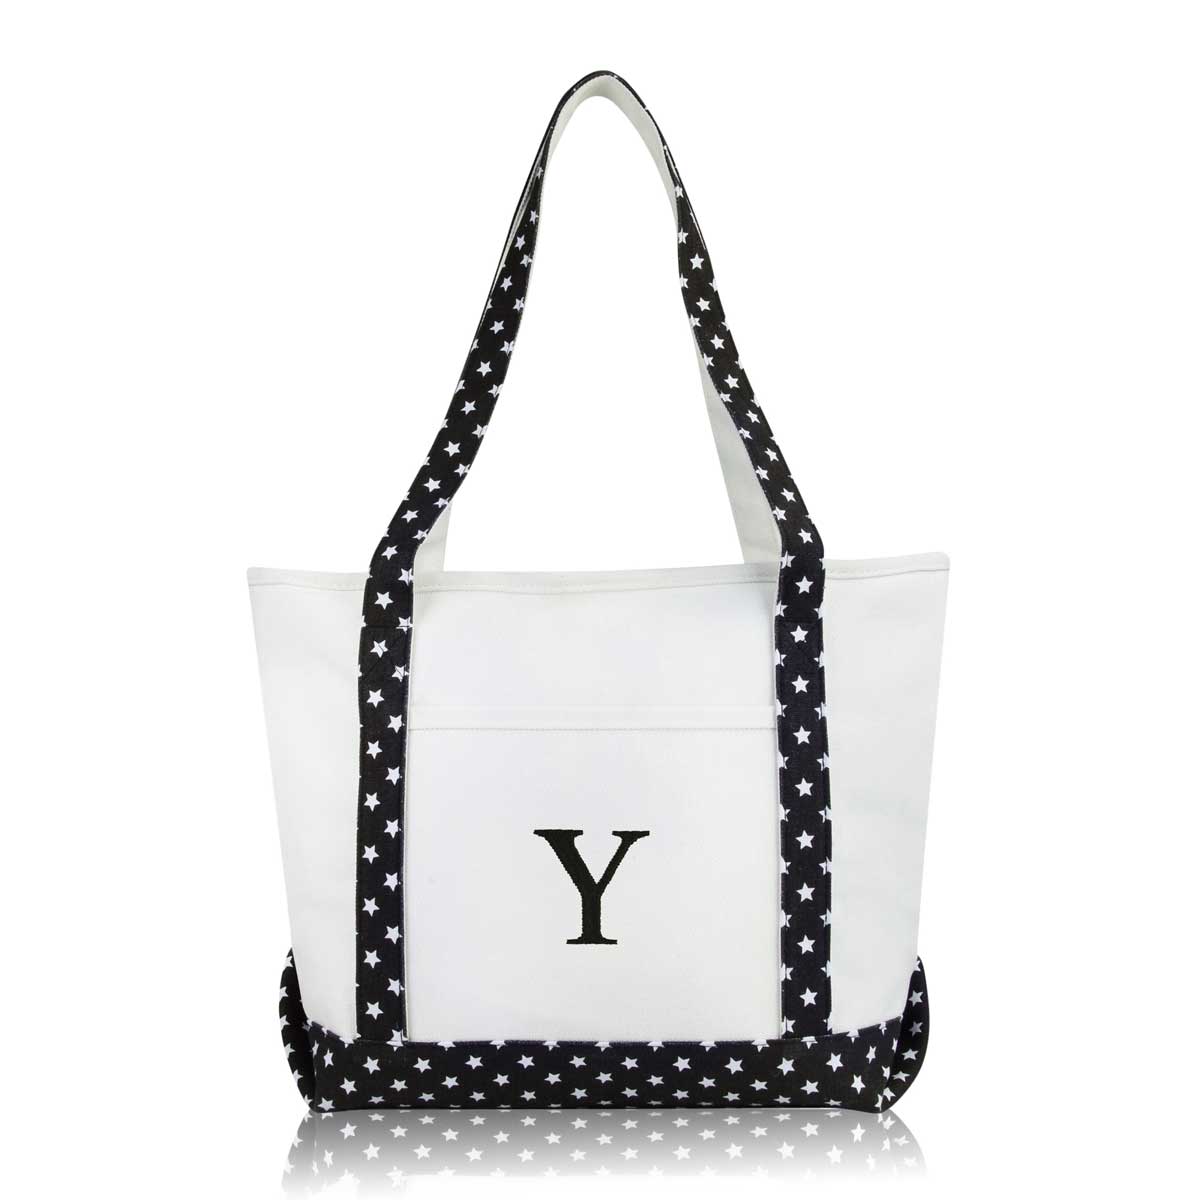 Dalix Medium Personalized Tote Bag Monogrammed Initial Letter - Y